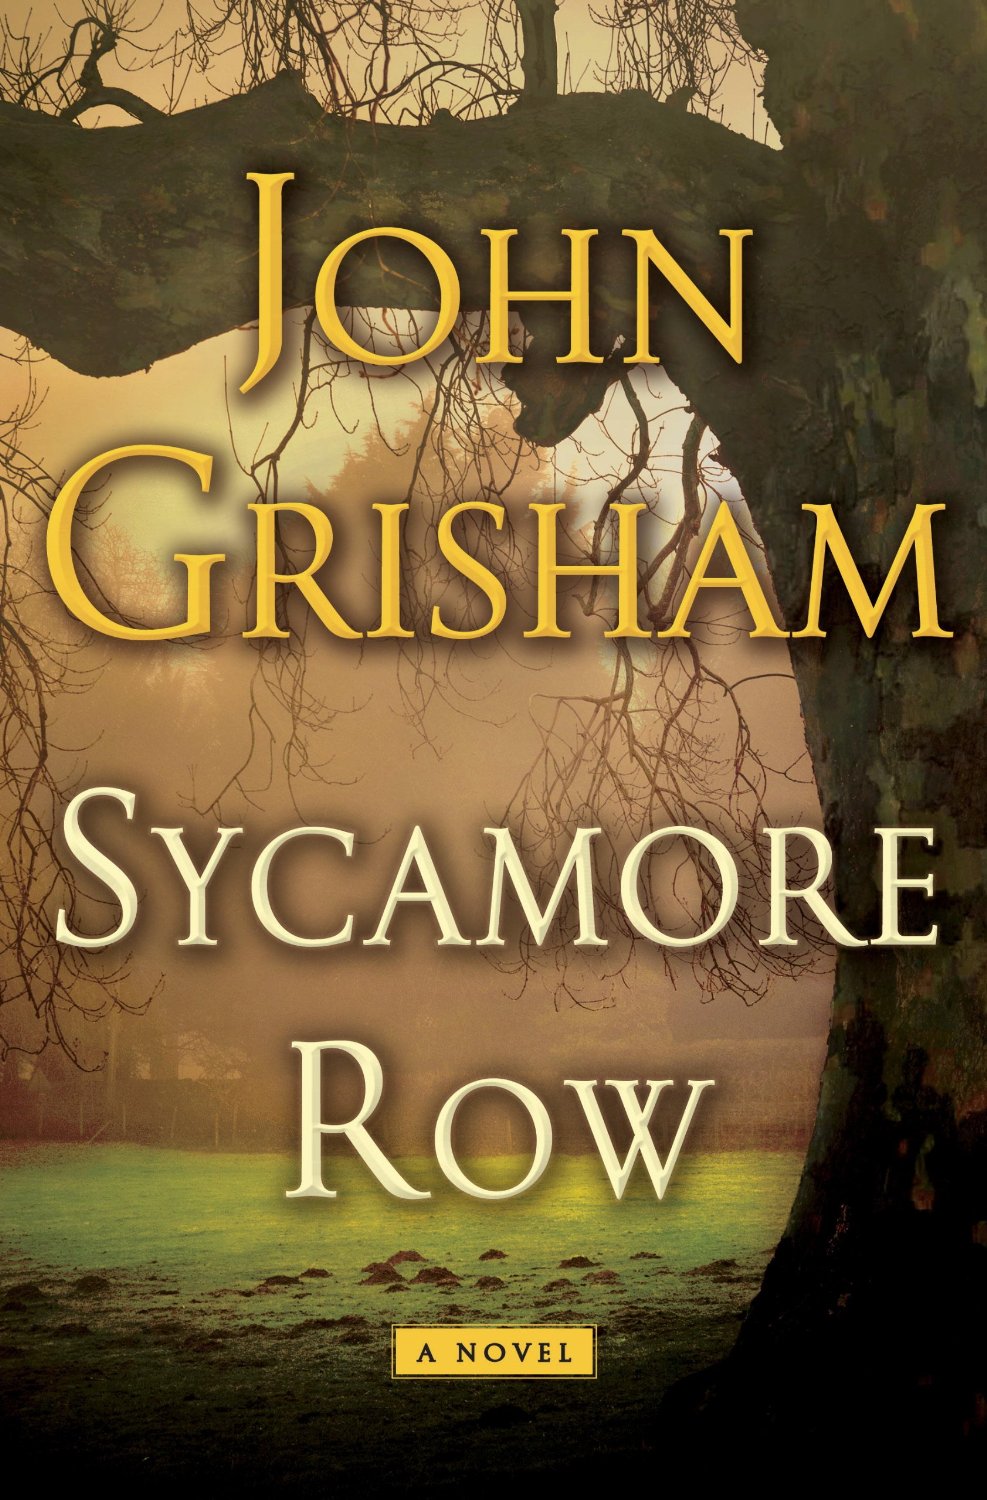 sycamore_row_-_cover_art_of_hardcover_book_by_john_grisham